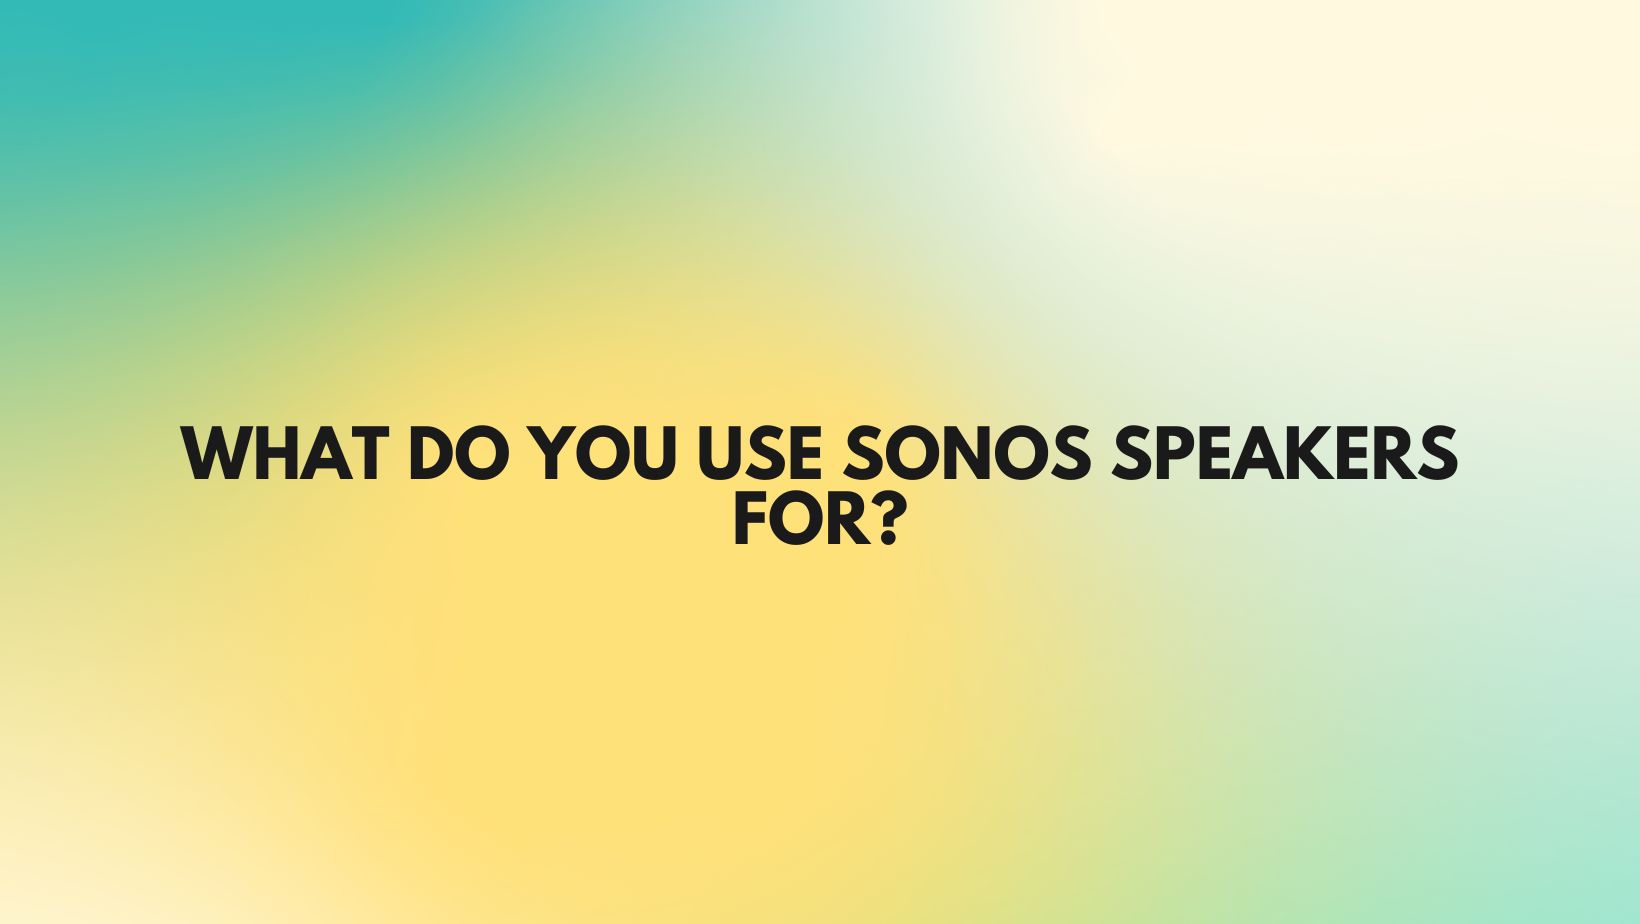 What do you use Sonos speakers for?